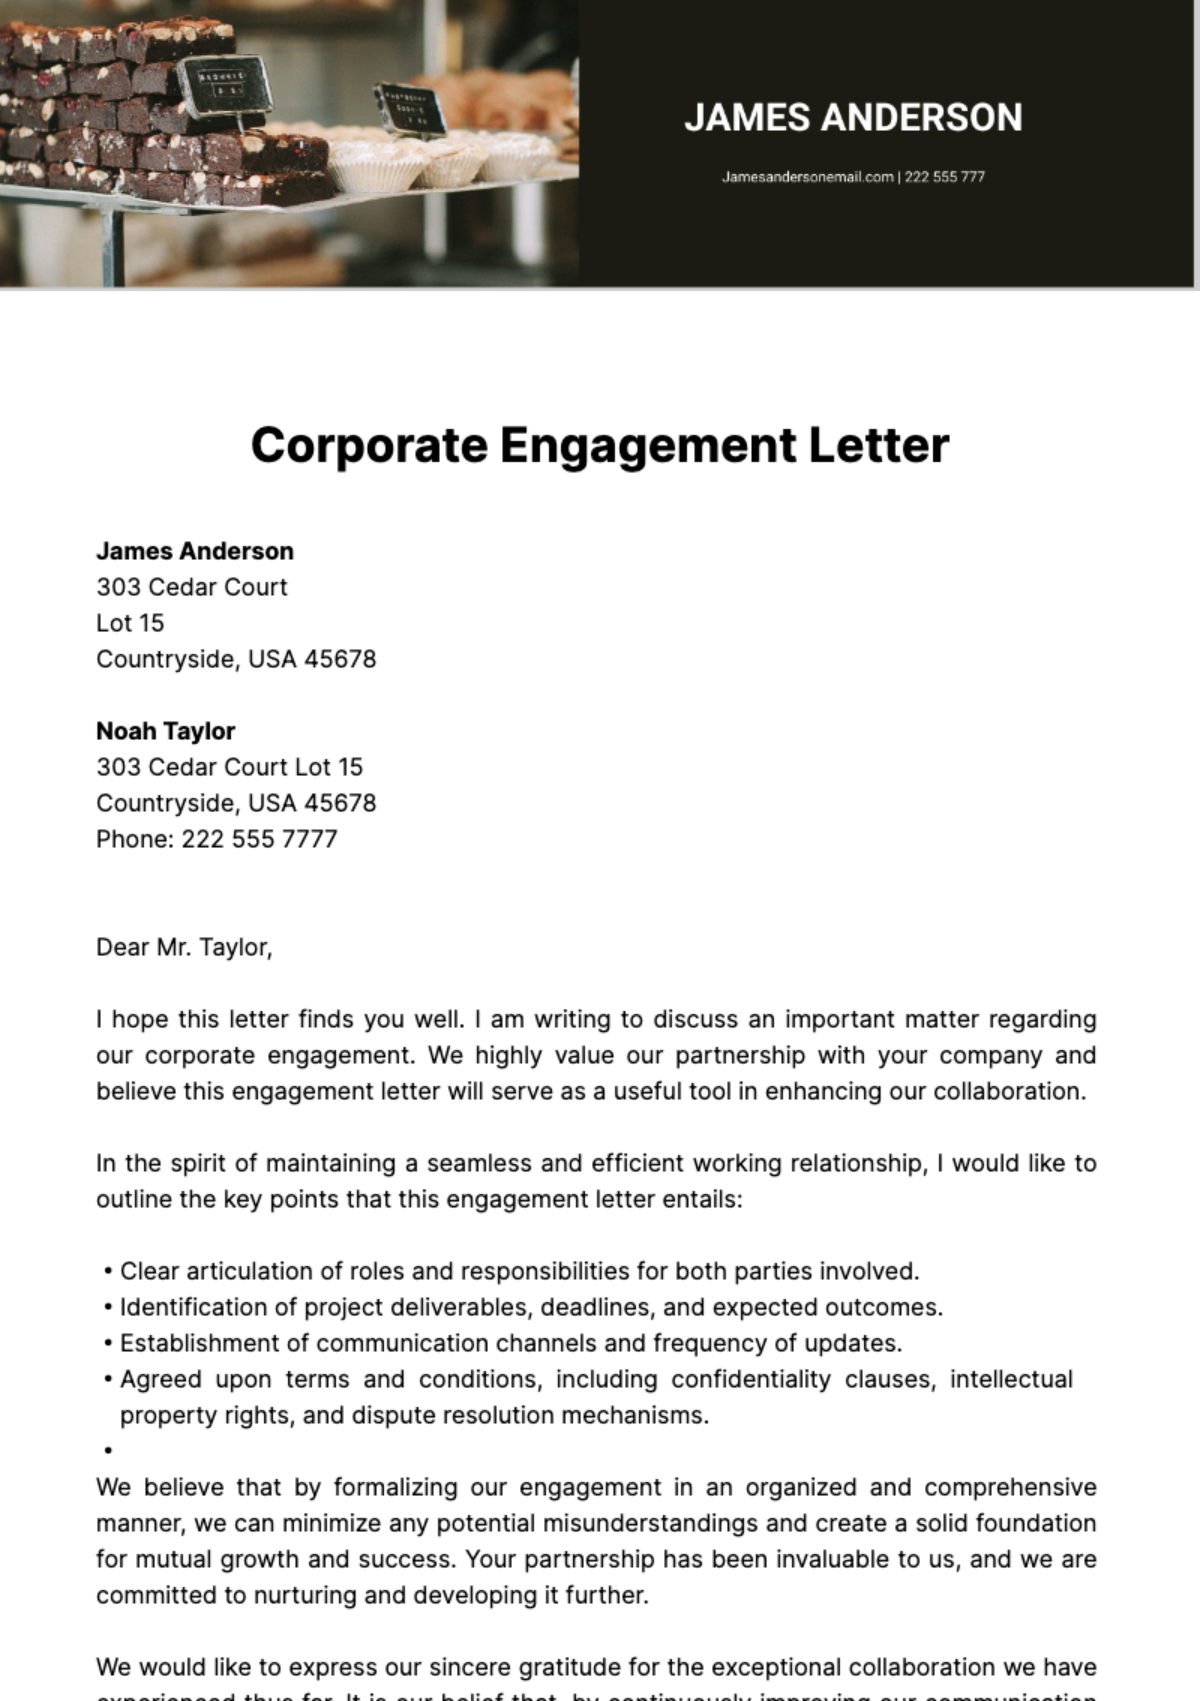 Corporate Engagement Letter Template